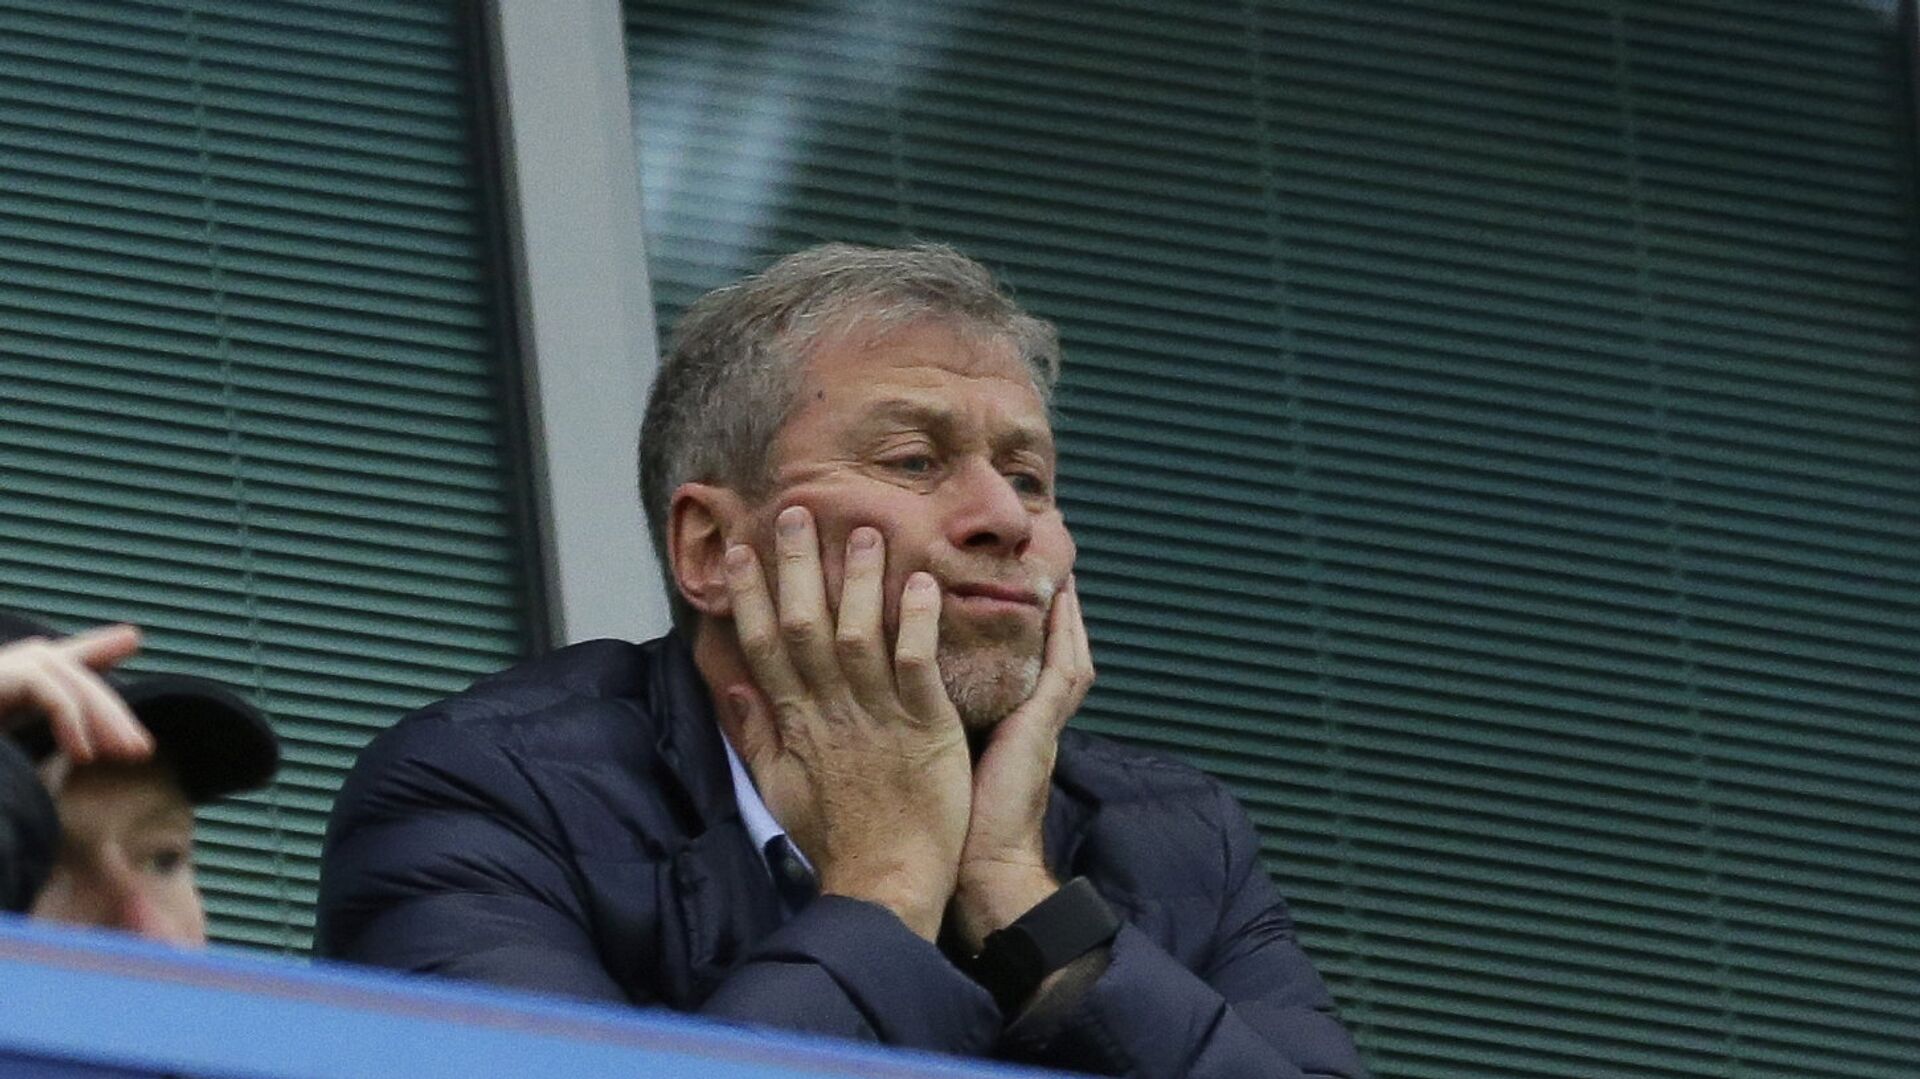 In this file photo dated Saturday, Dec. 19, 2015, Chelsea soccer club owner Roman Abramovich sits in his box before the English Premier League soccer match between Chelsea and Sunderland at Stamford Bridge stadium in London. Russian billionaire Roman Abramovich has received Israeli citizenship after his British visa has not been renewed. An Israeli Immigration and Absorption Ministry official says the Chelsea soccer club owner arrived in Israel Monday and was granted citizenship in accordance with an Israeli law granting that right to people of Jewish descent - اسپوتنیک افغانستان  , 1920, 12.03.2022